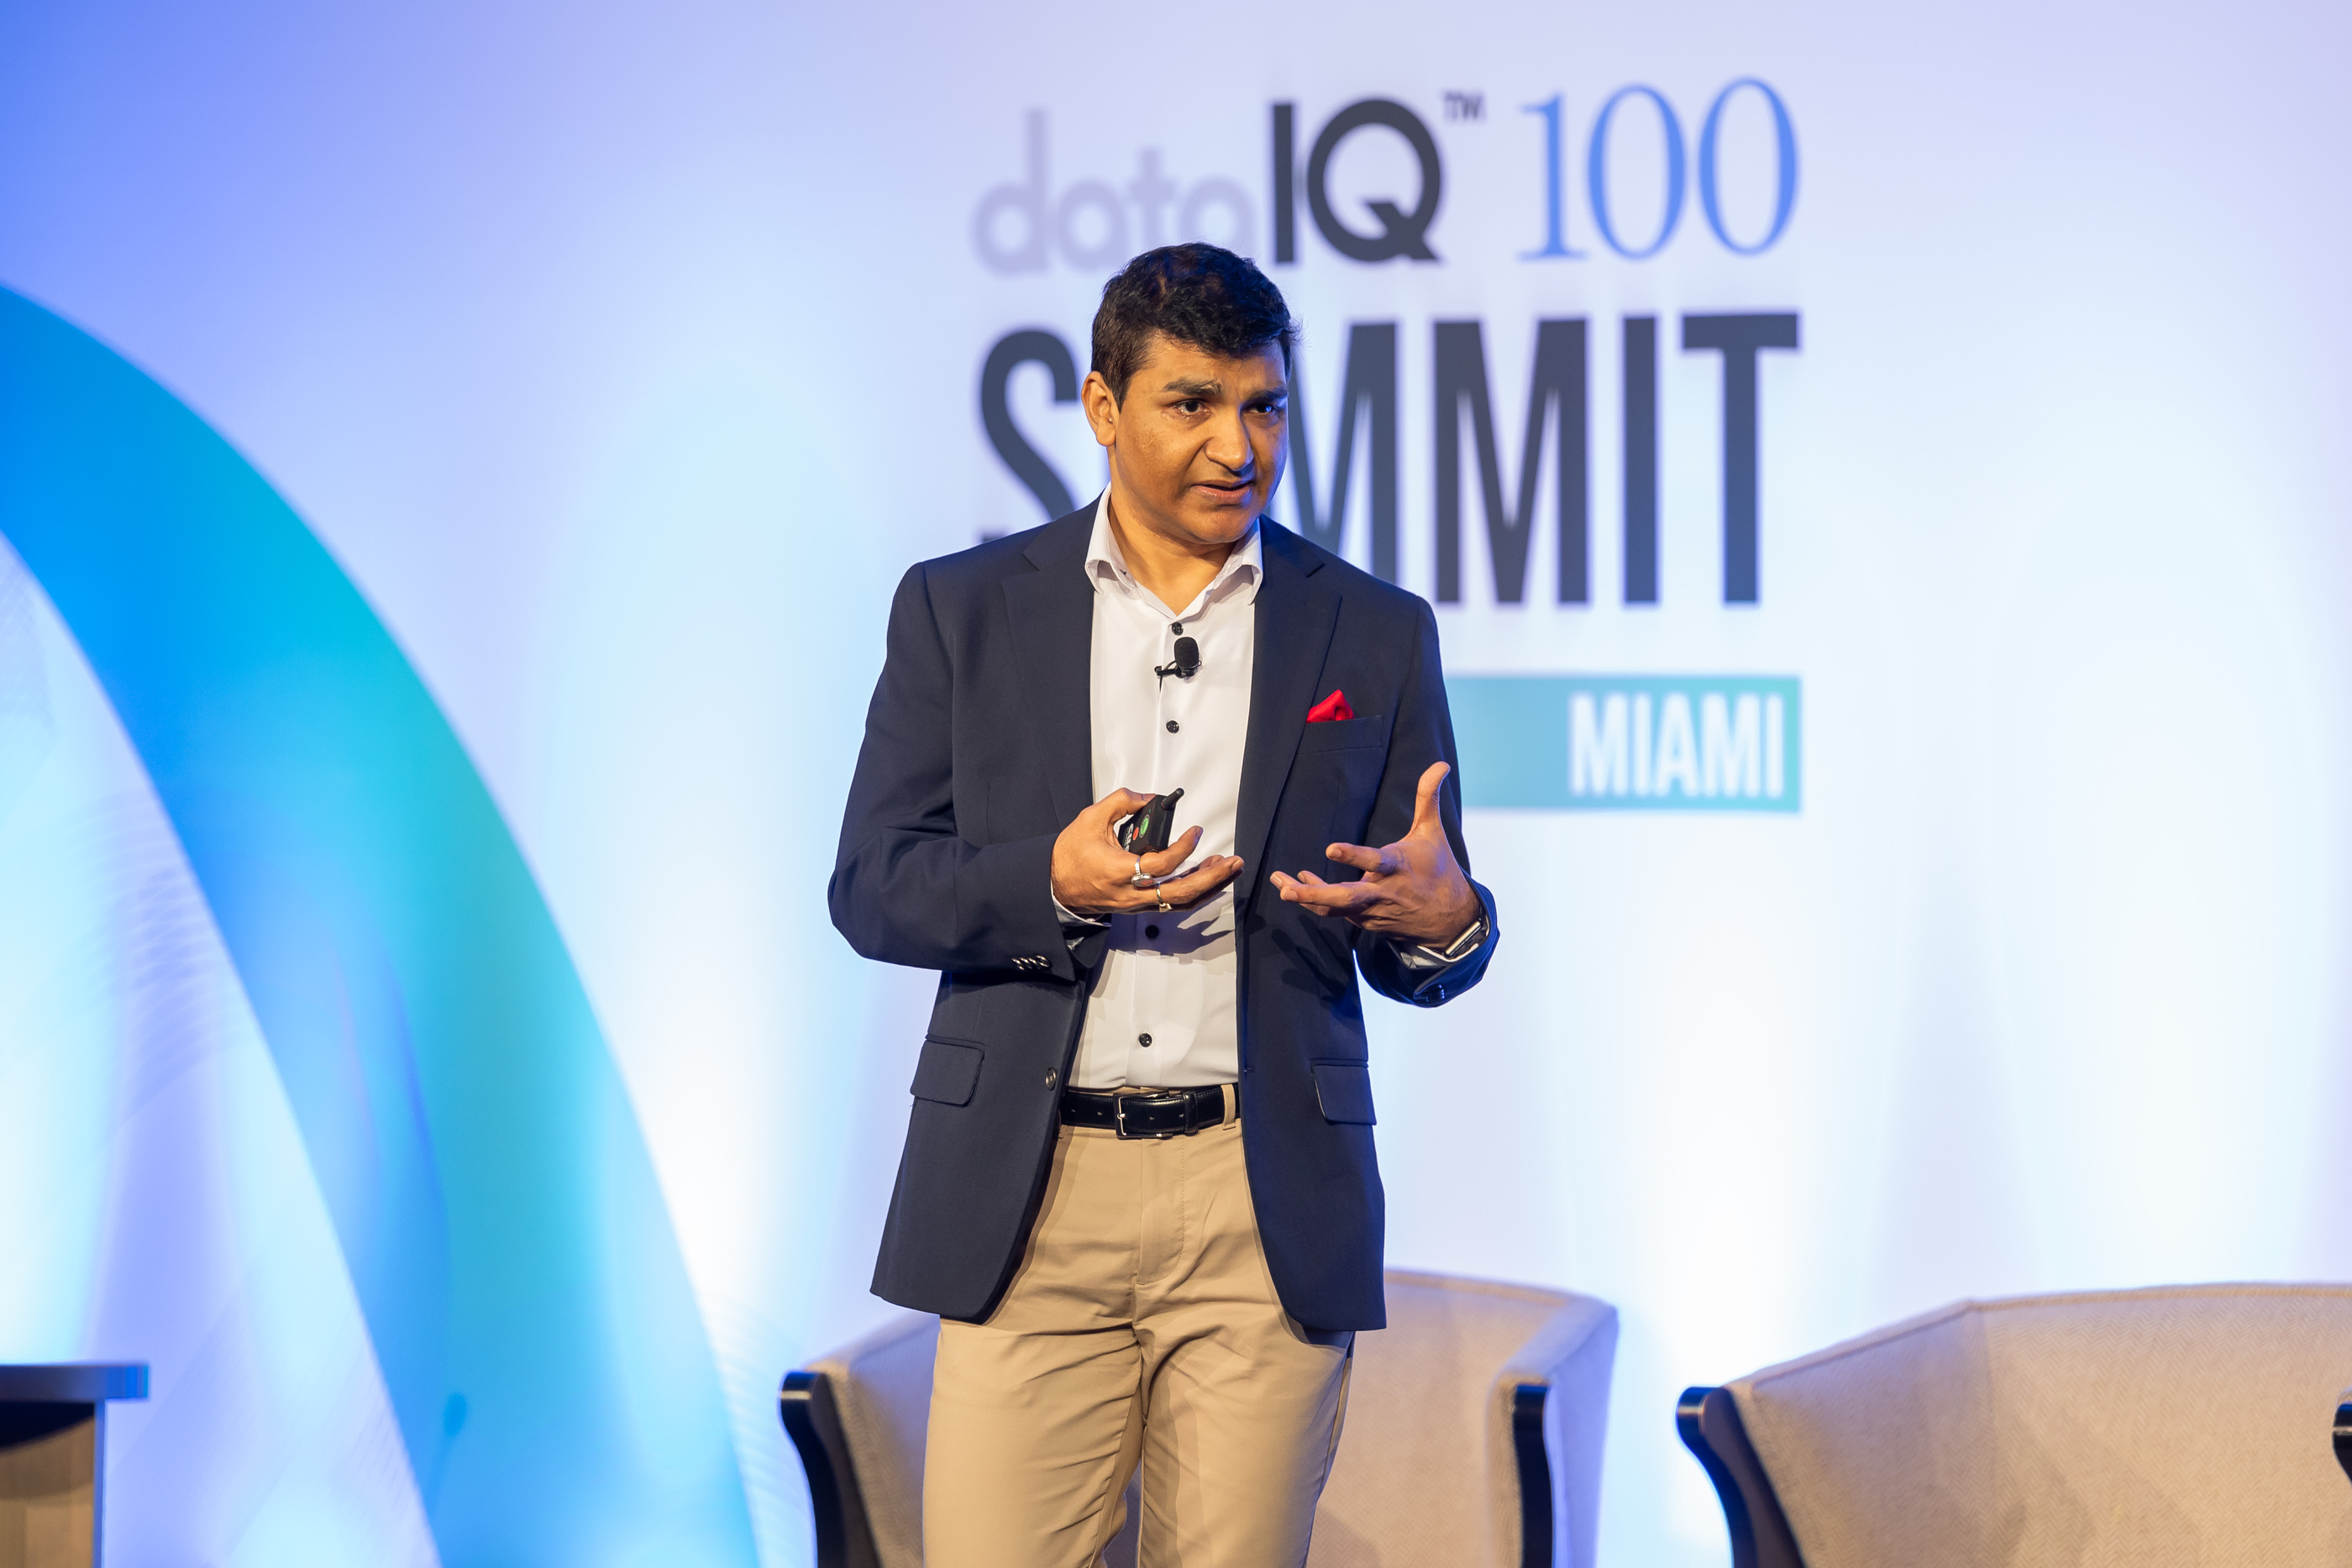 Data narrator – Essential insights from the DataIQ 100 Summit